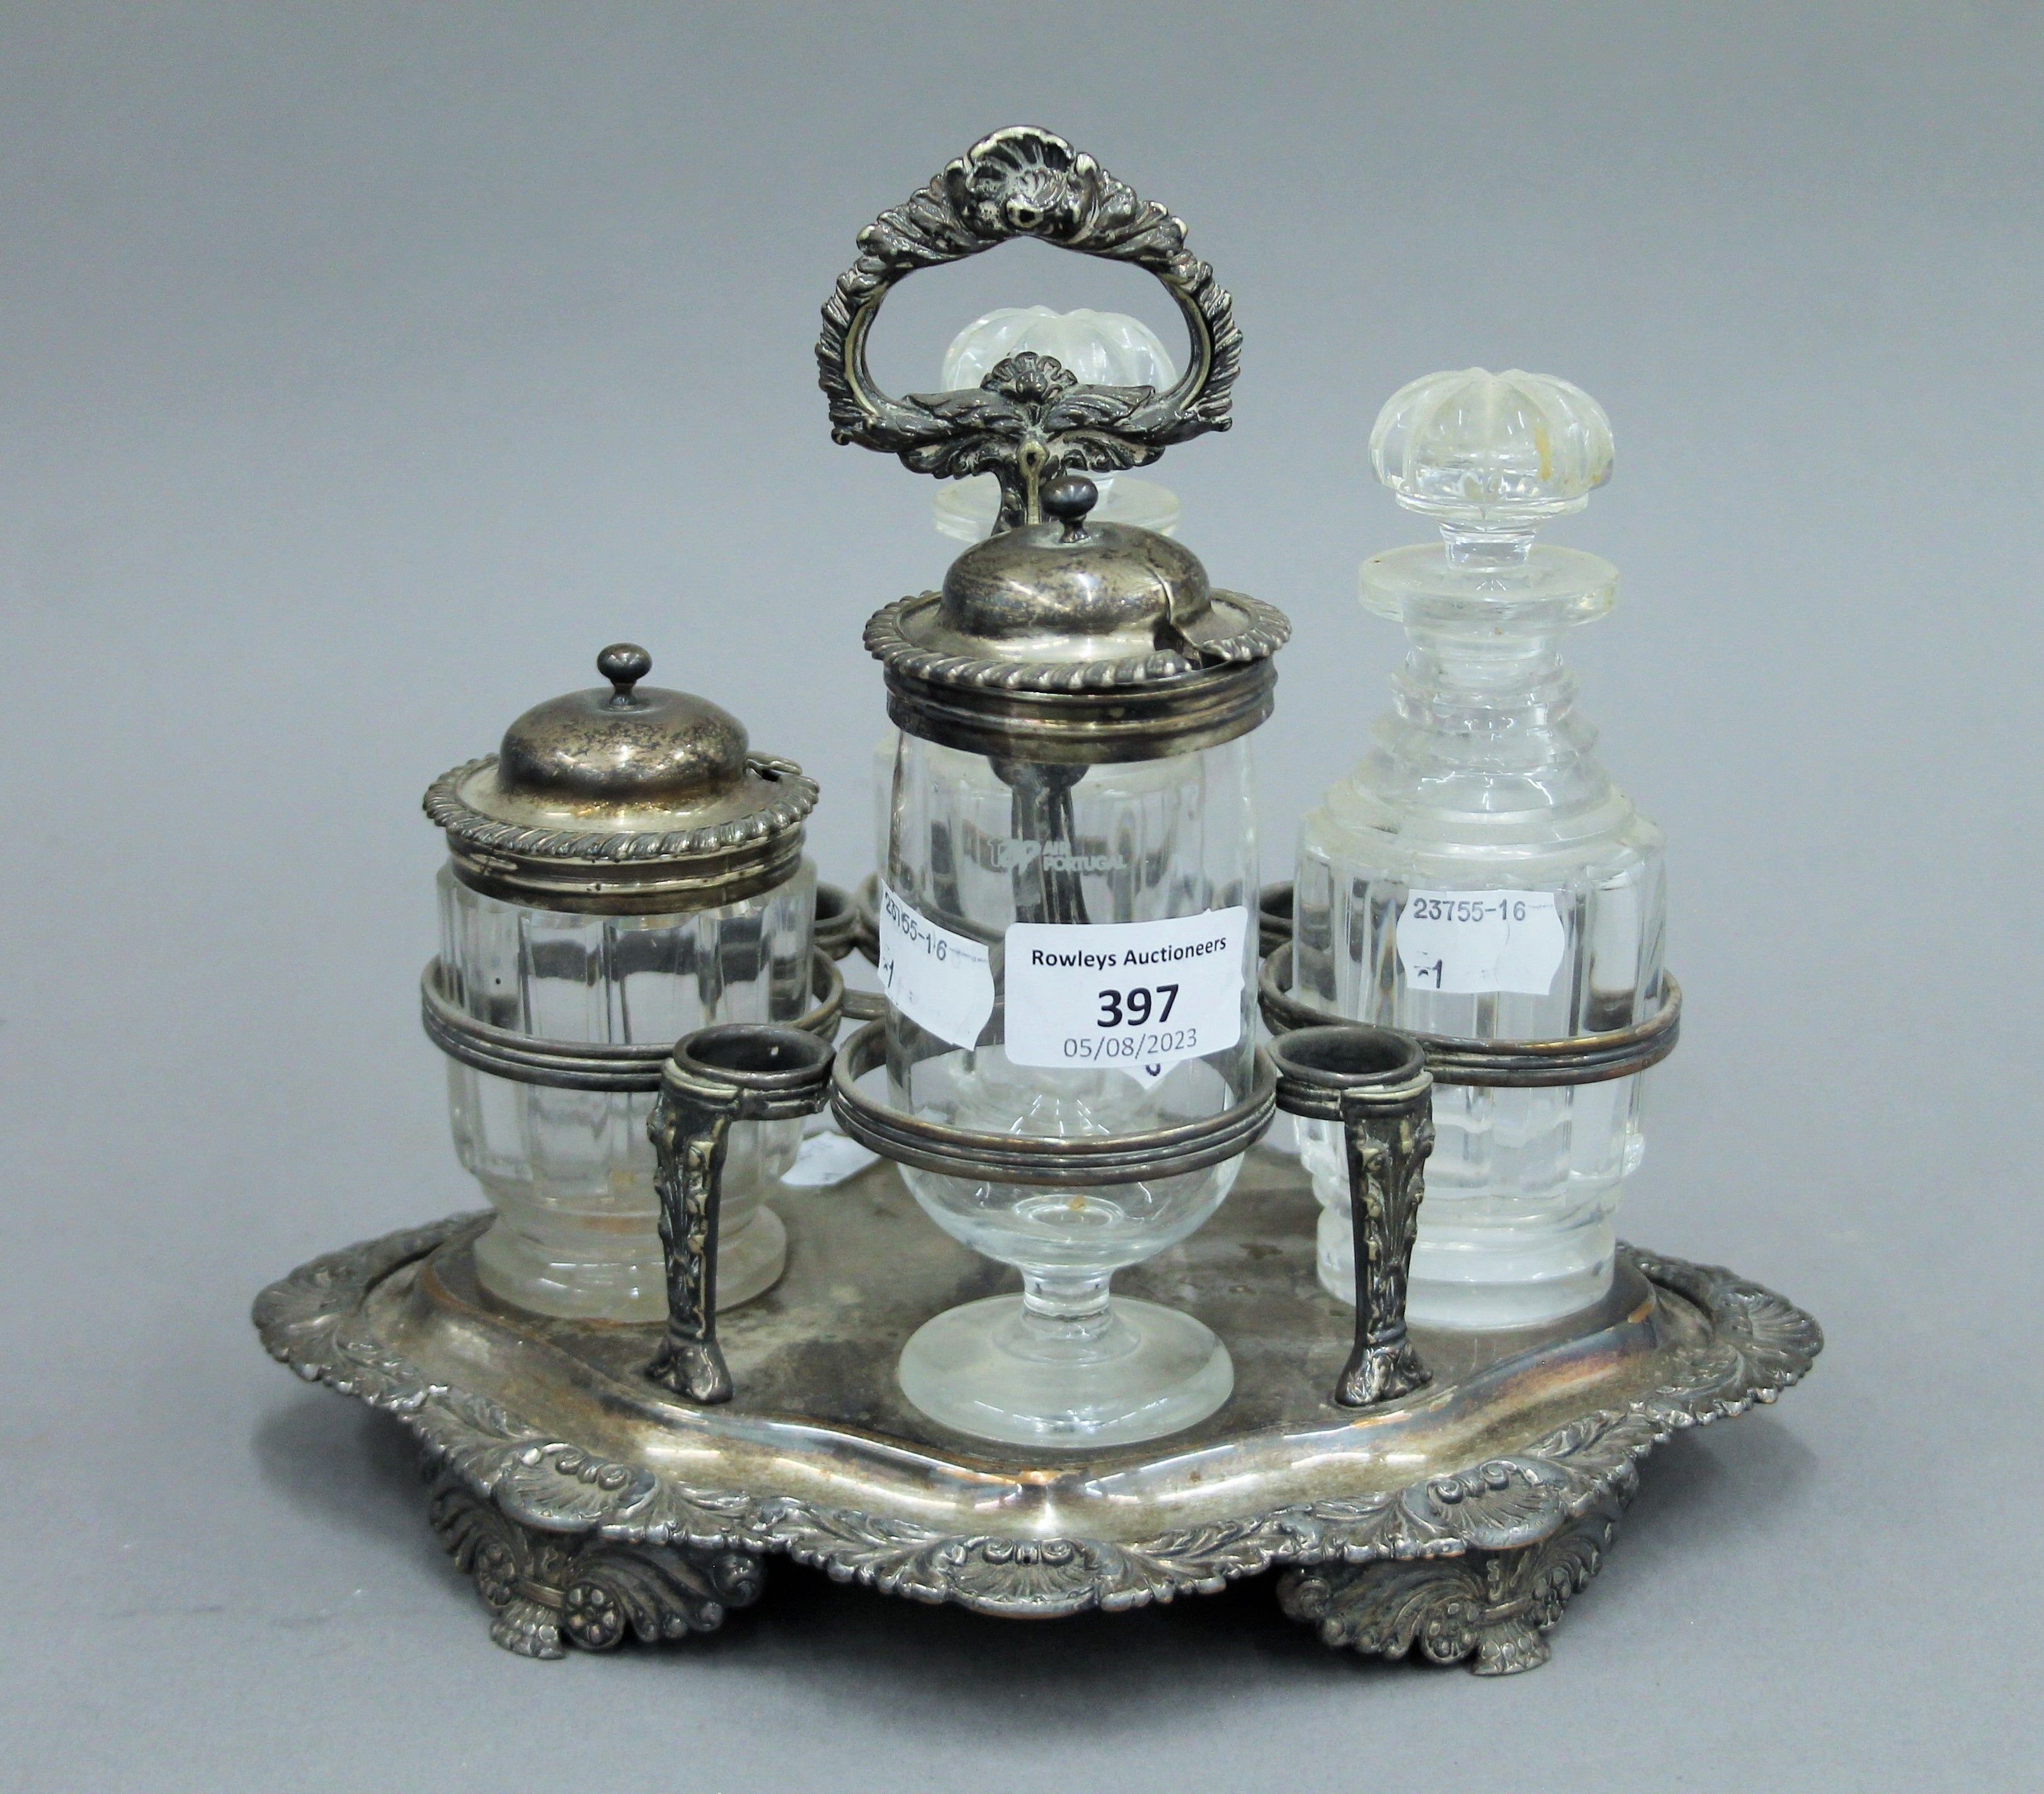 A silver plated cruet stand with associated fittings, two with silver mounts and a small silver lid.